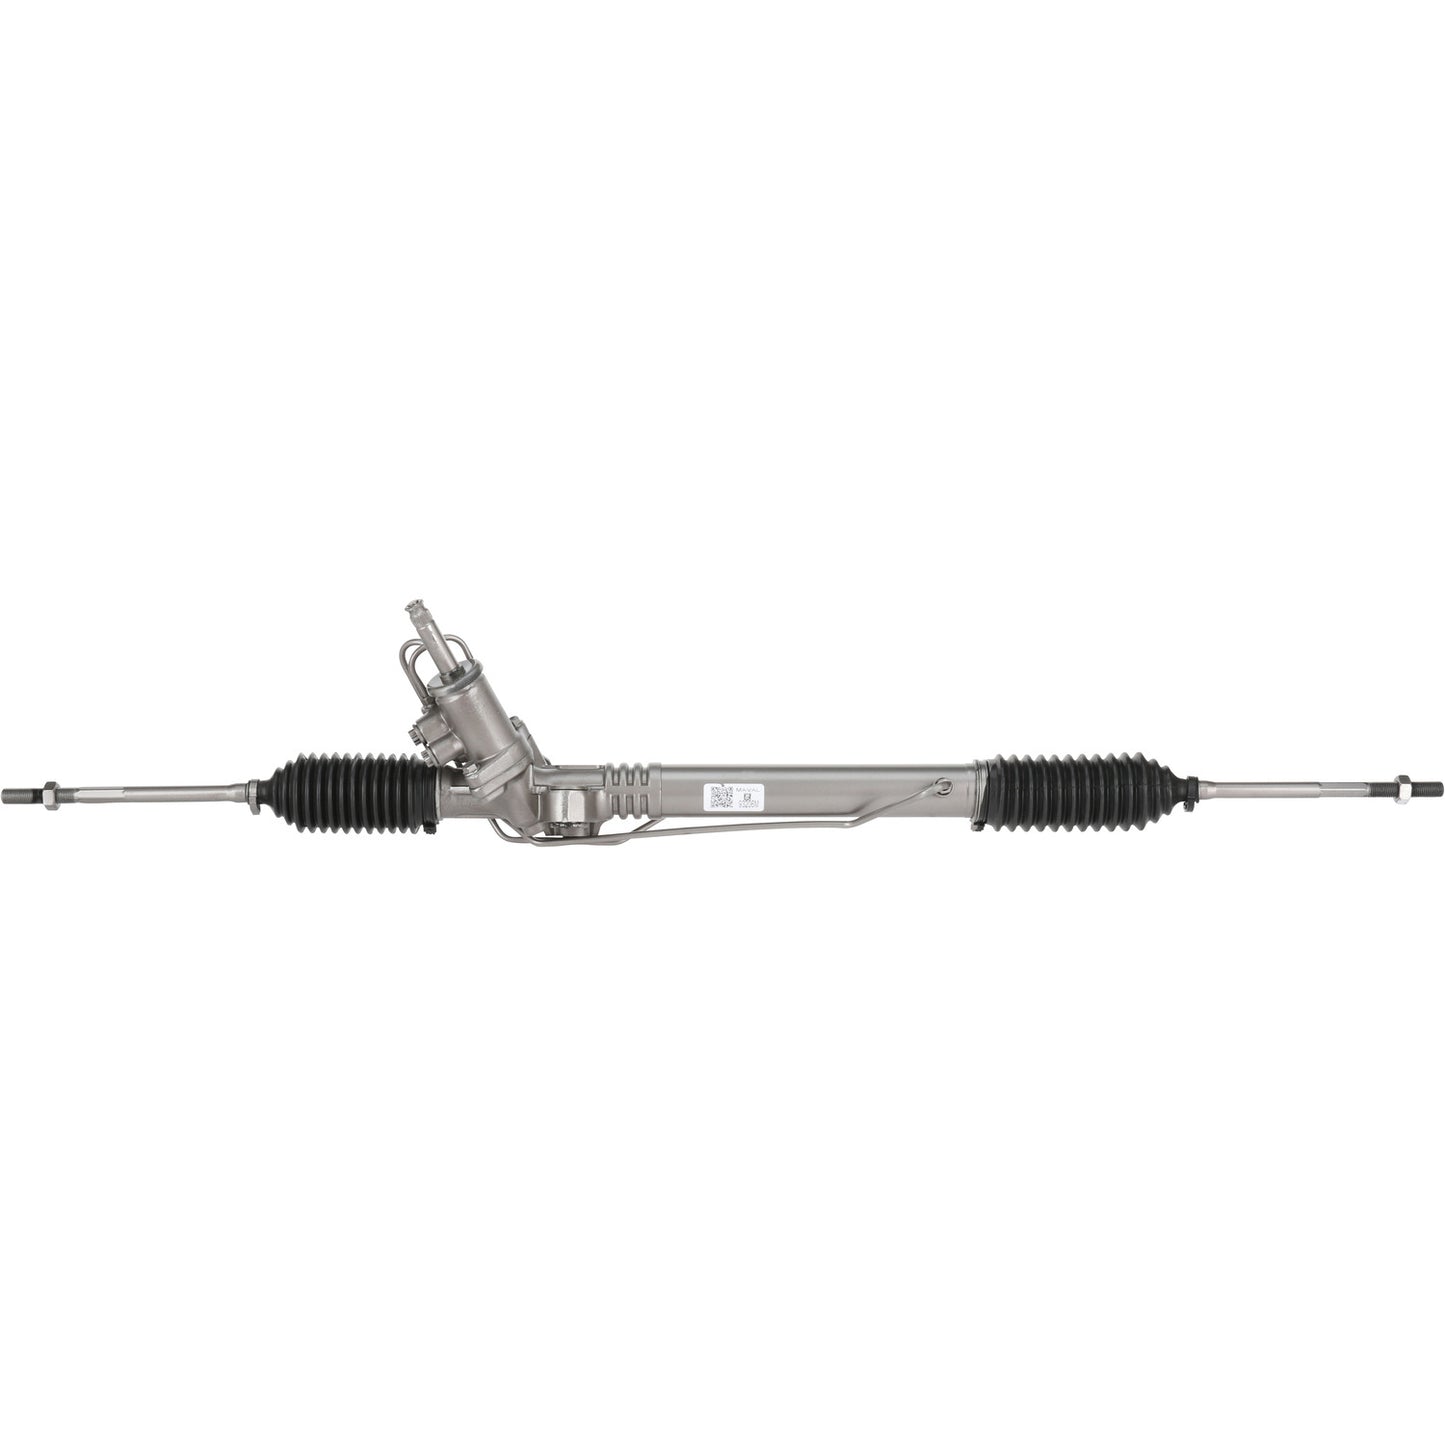 Rack and Pinion Assembly - MAVAL - Hydraulic Power - Remanufactured - 93206M